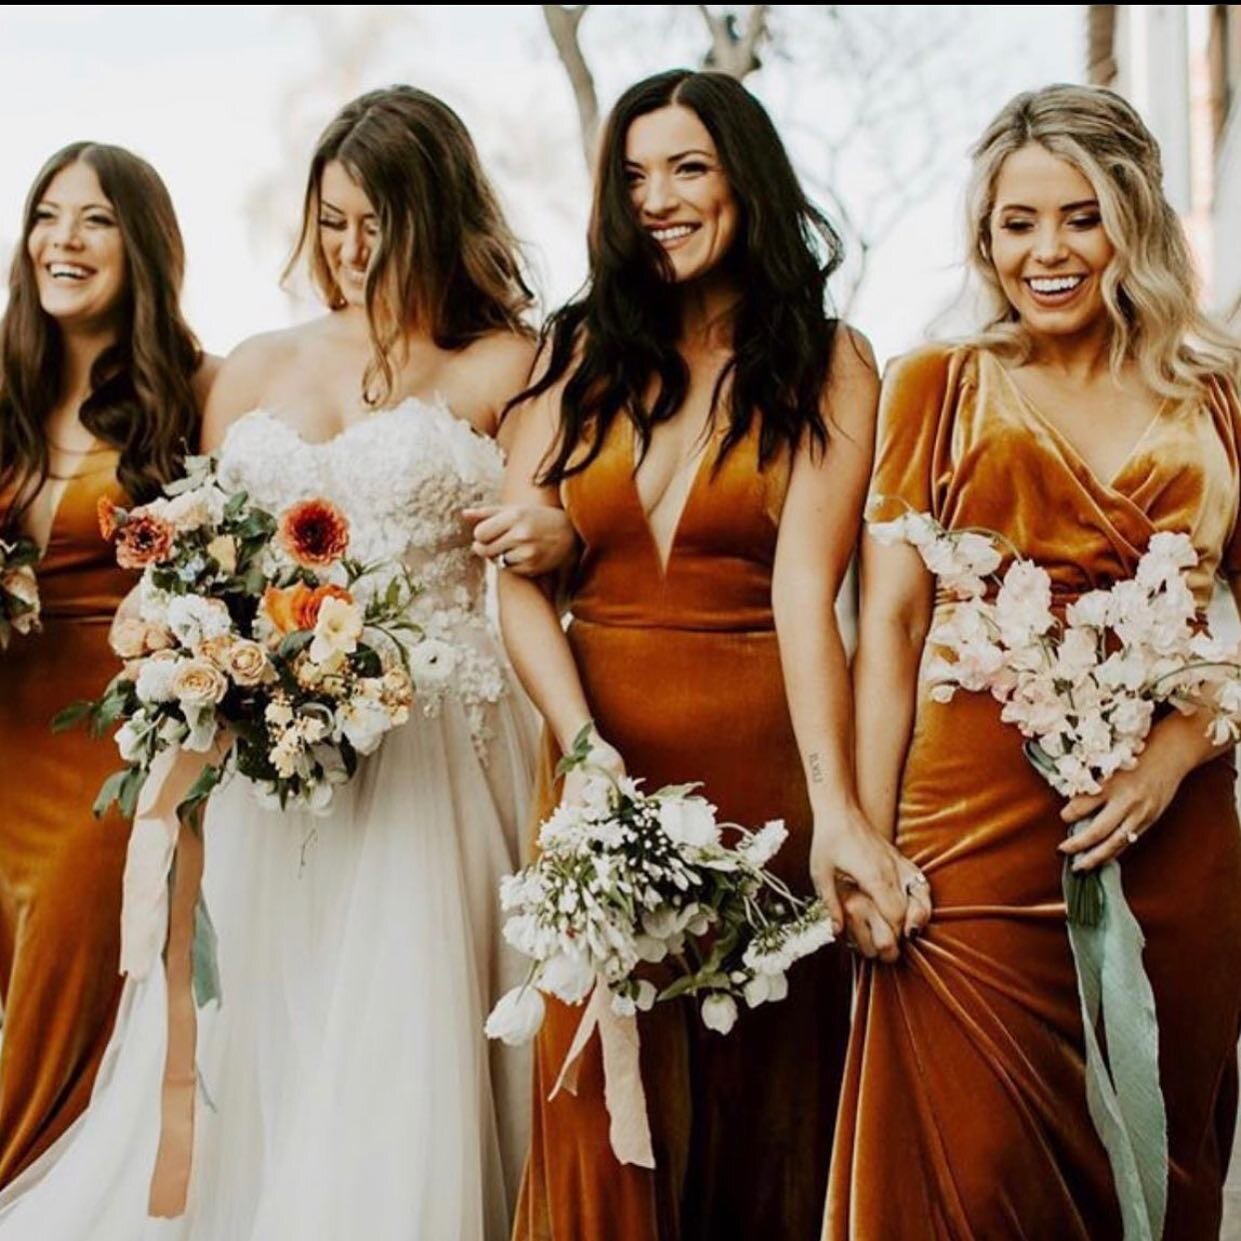 It&rsquo;s Fall Y&rsquo;all! 🍁 We can&rsquo;t wait for the golden florals and the warm amber bridesmaids dresses.

We always suggest  that the bridal party receives professional hair and makeup. When everyone looks united it a makes world a differen